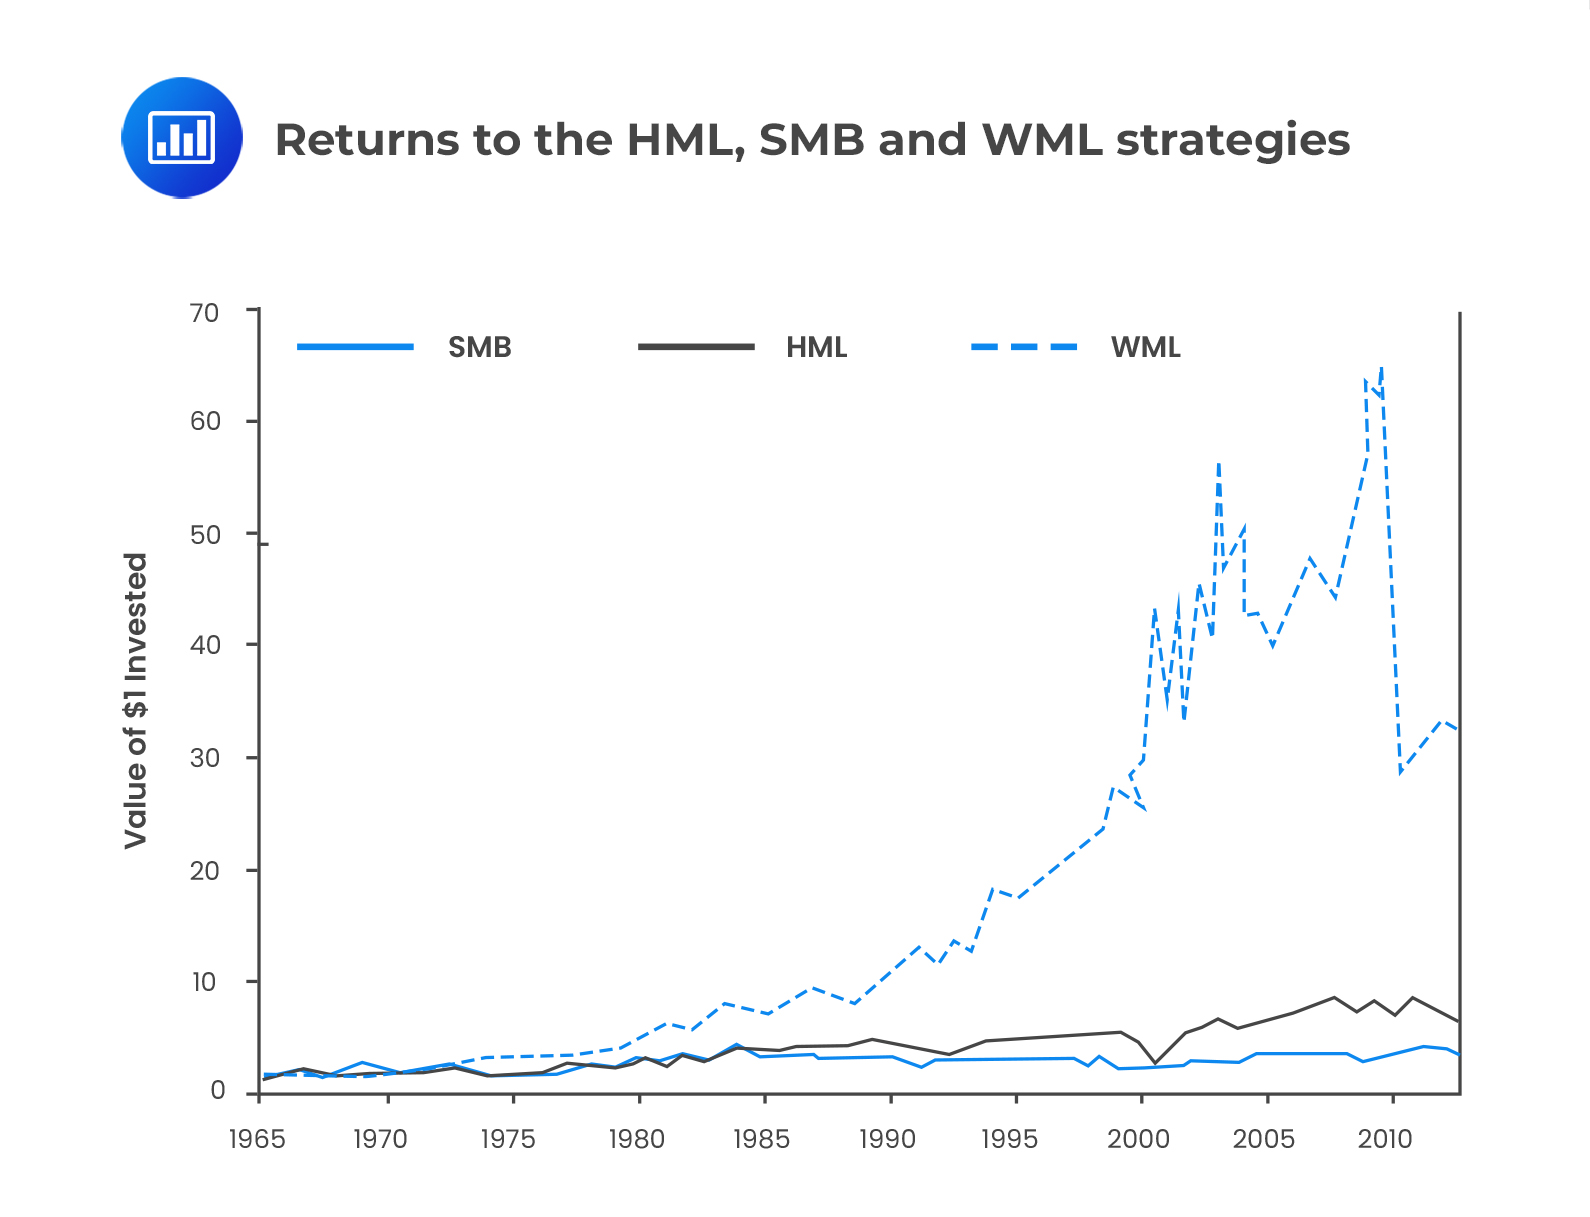 Returns to the HML, SMB and WML strategies